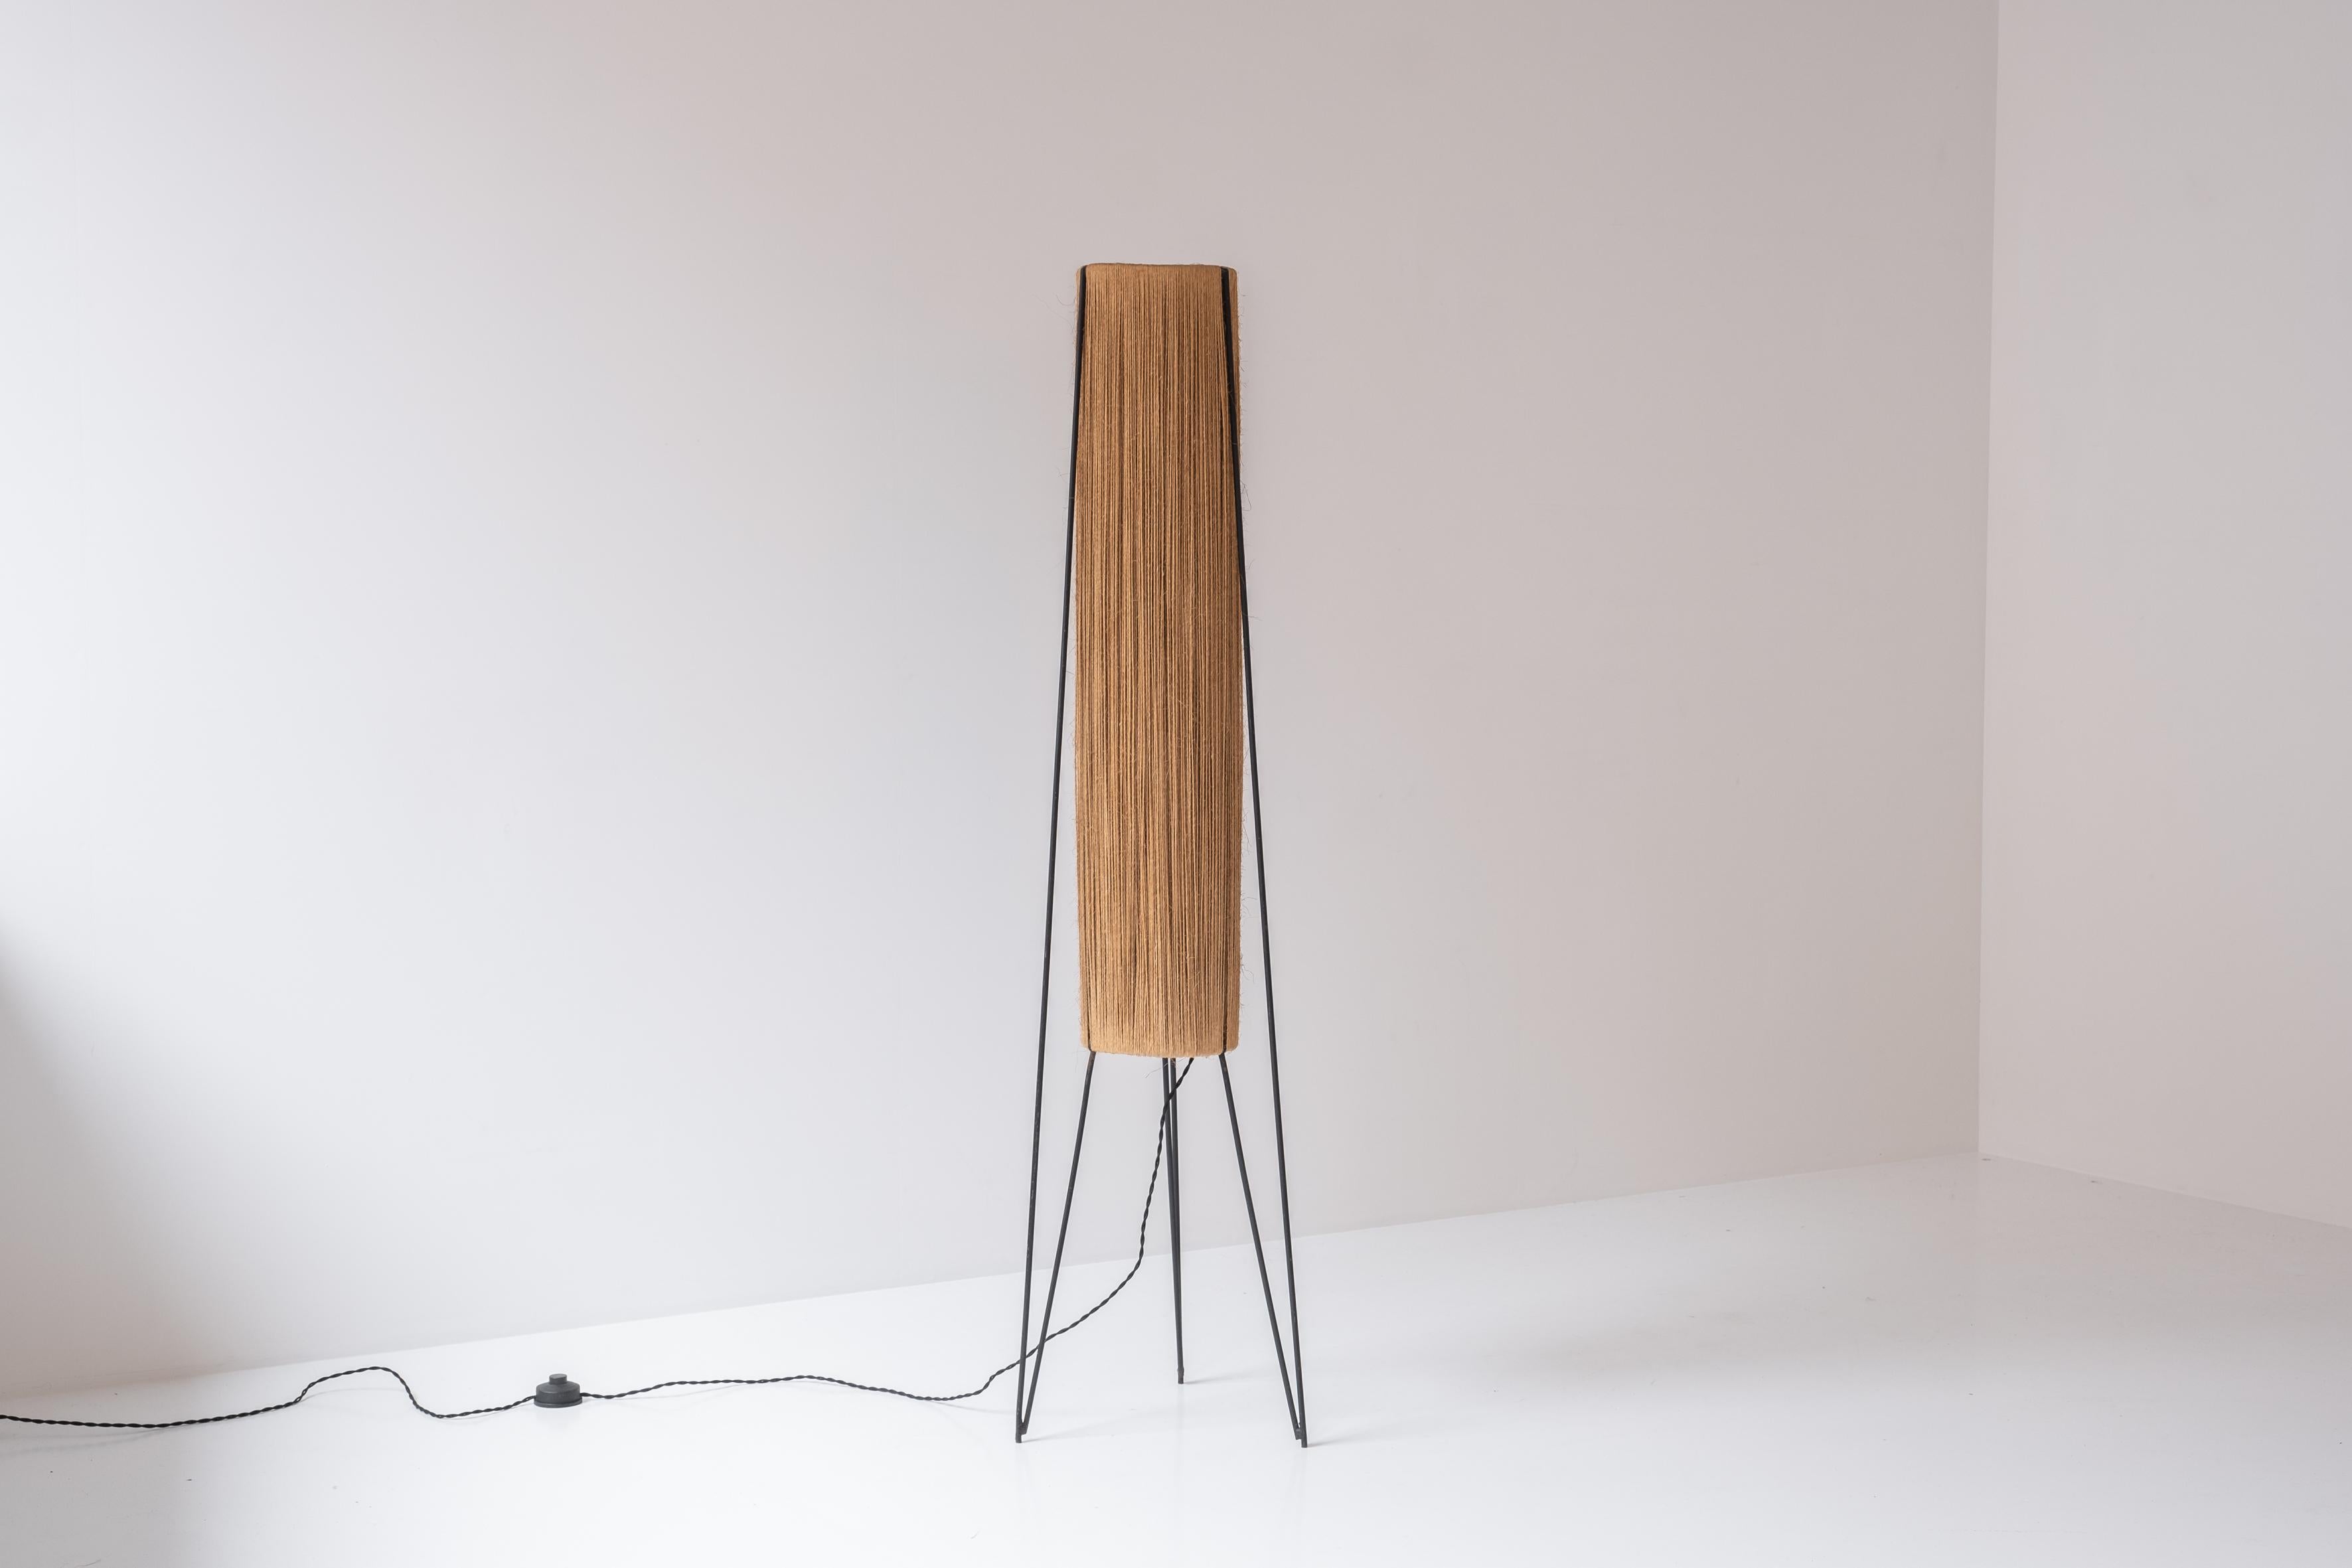 Elegant floor lamp by Hesse-Leuchten from Germany, designed in the 1960s. This rare floor lamp features a black lacquered steel frame with a cylinder cord centre. The design and combination of the two materials making this floor lamp a striking